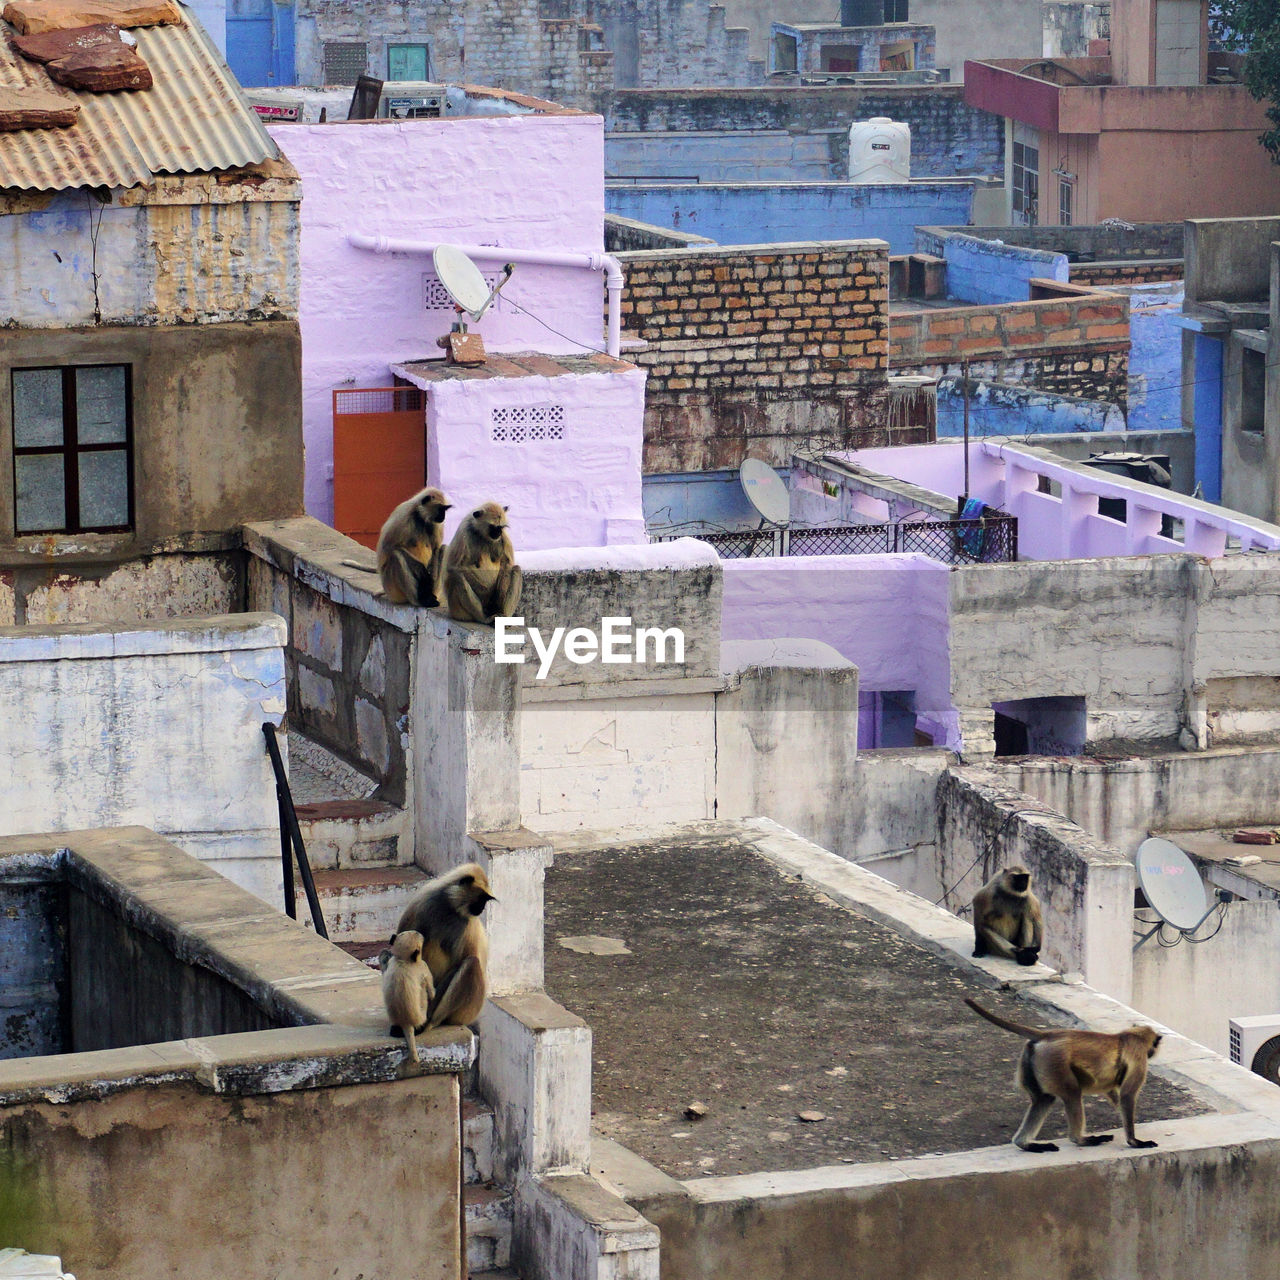 Flat colorful rooftops with many monkeys are a traditional view in the blue city jodhpur, india